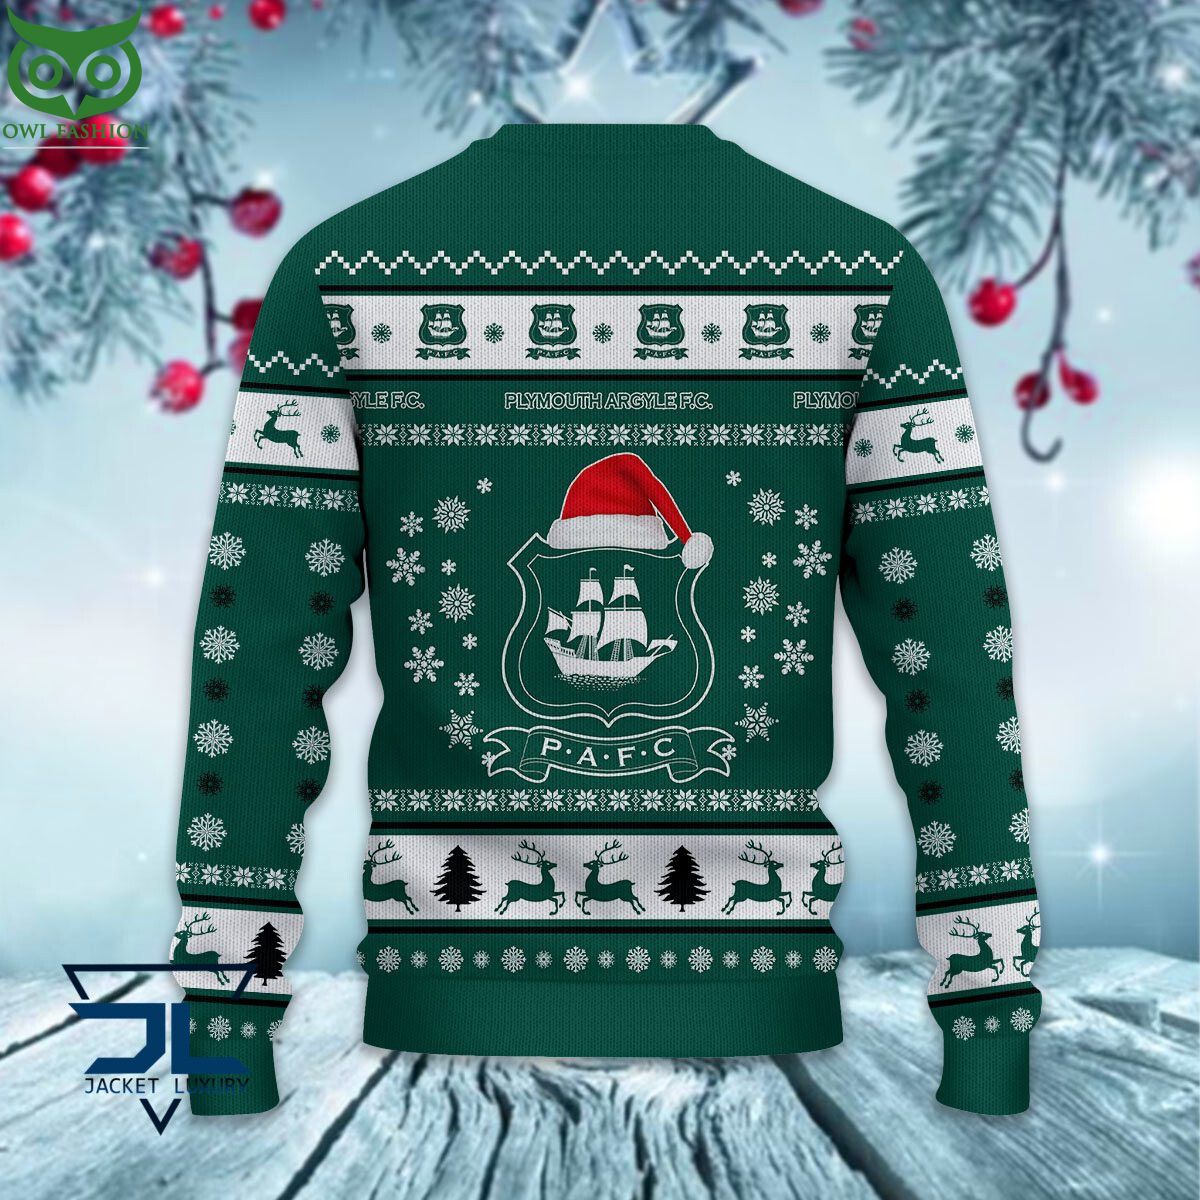 trending plymouth argyle f c epl league cup new ugly sweater 3 qZvC8.jpg